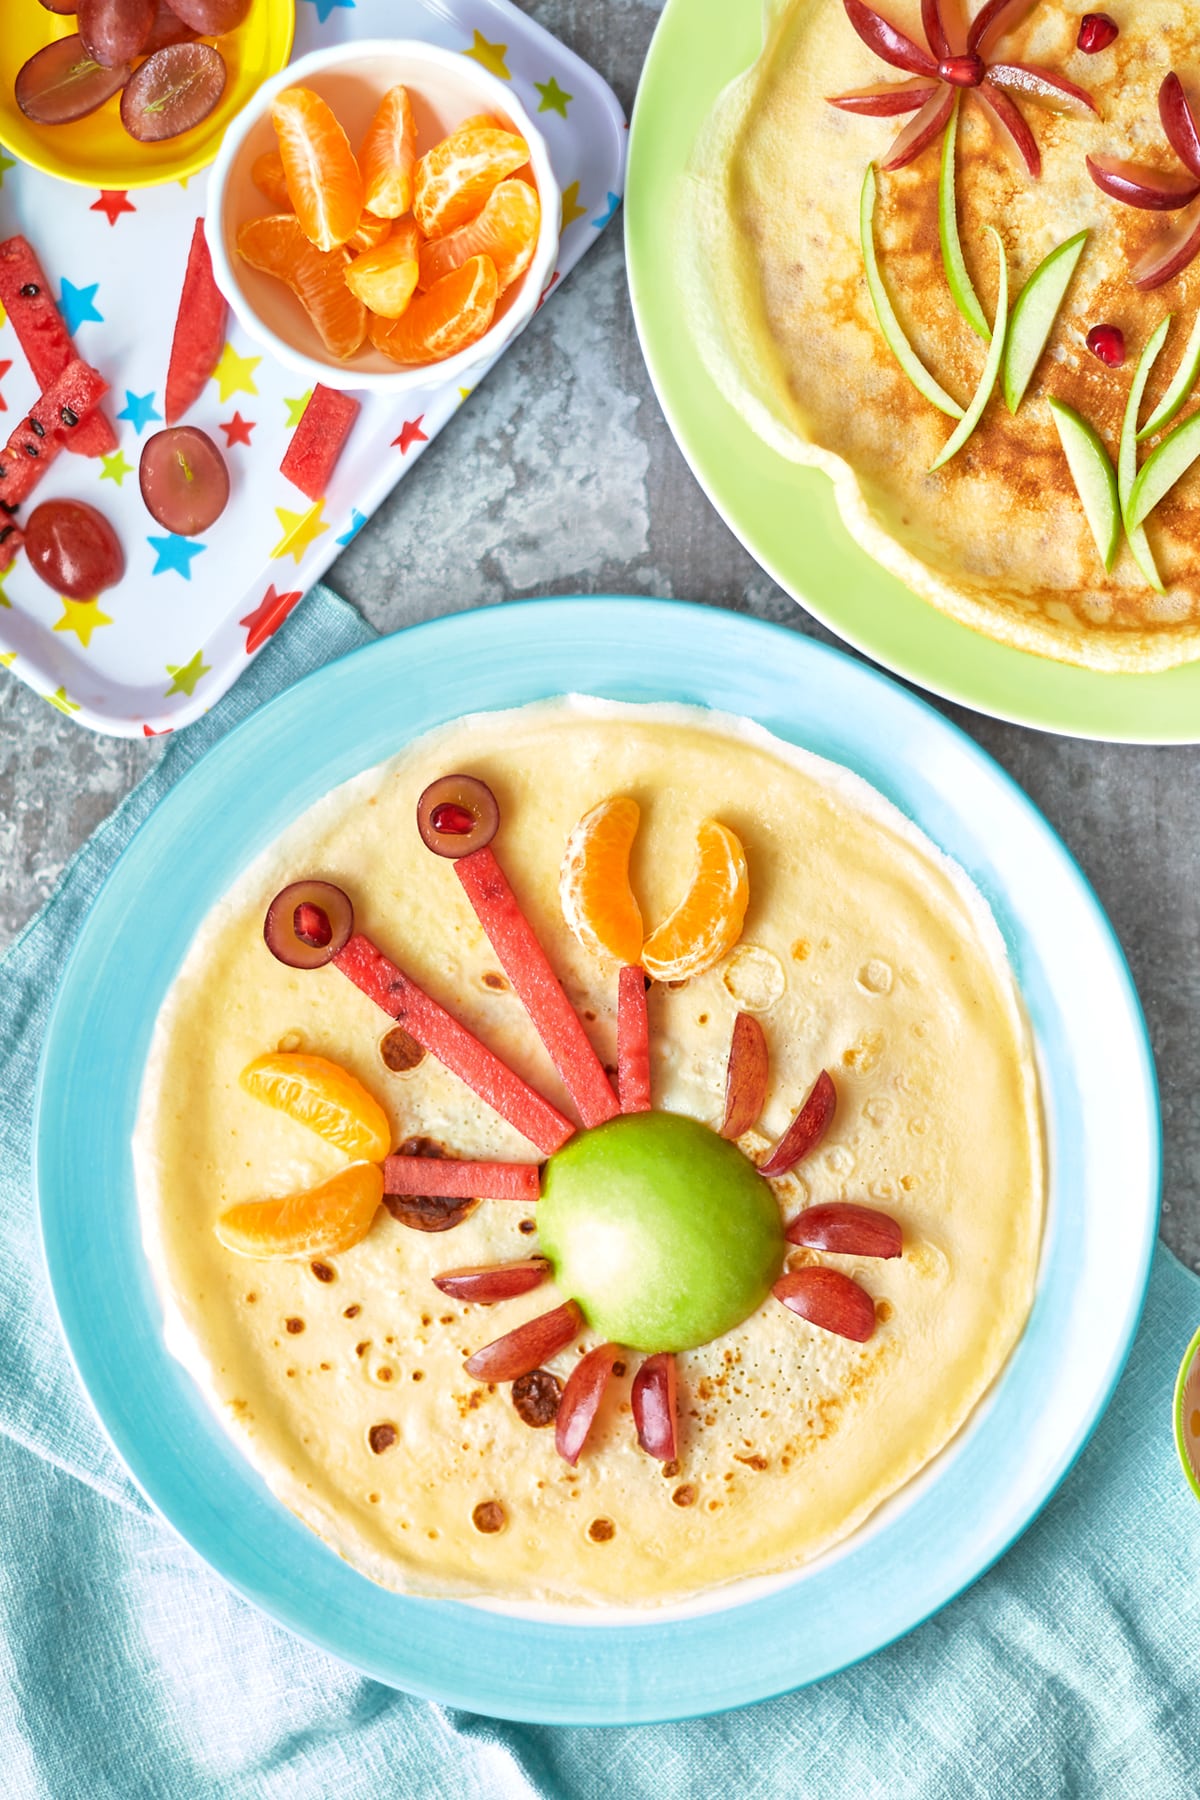 A crepe-style pancake on a blue plate is decorated with fruit to resemble a crab.